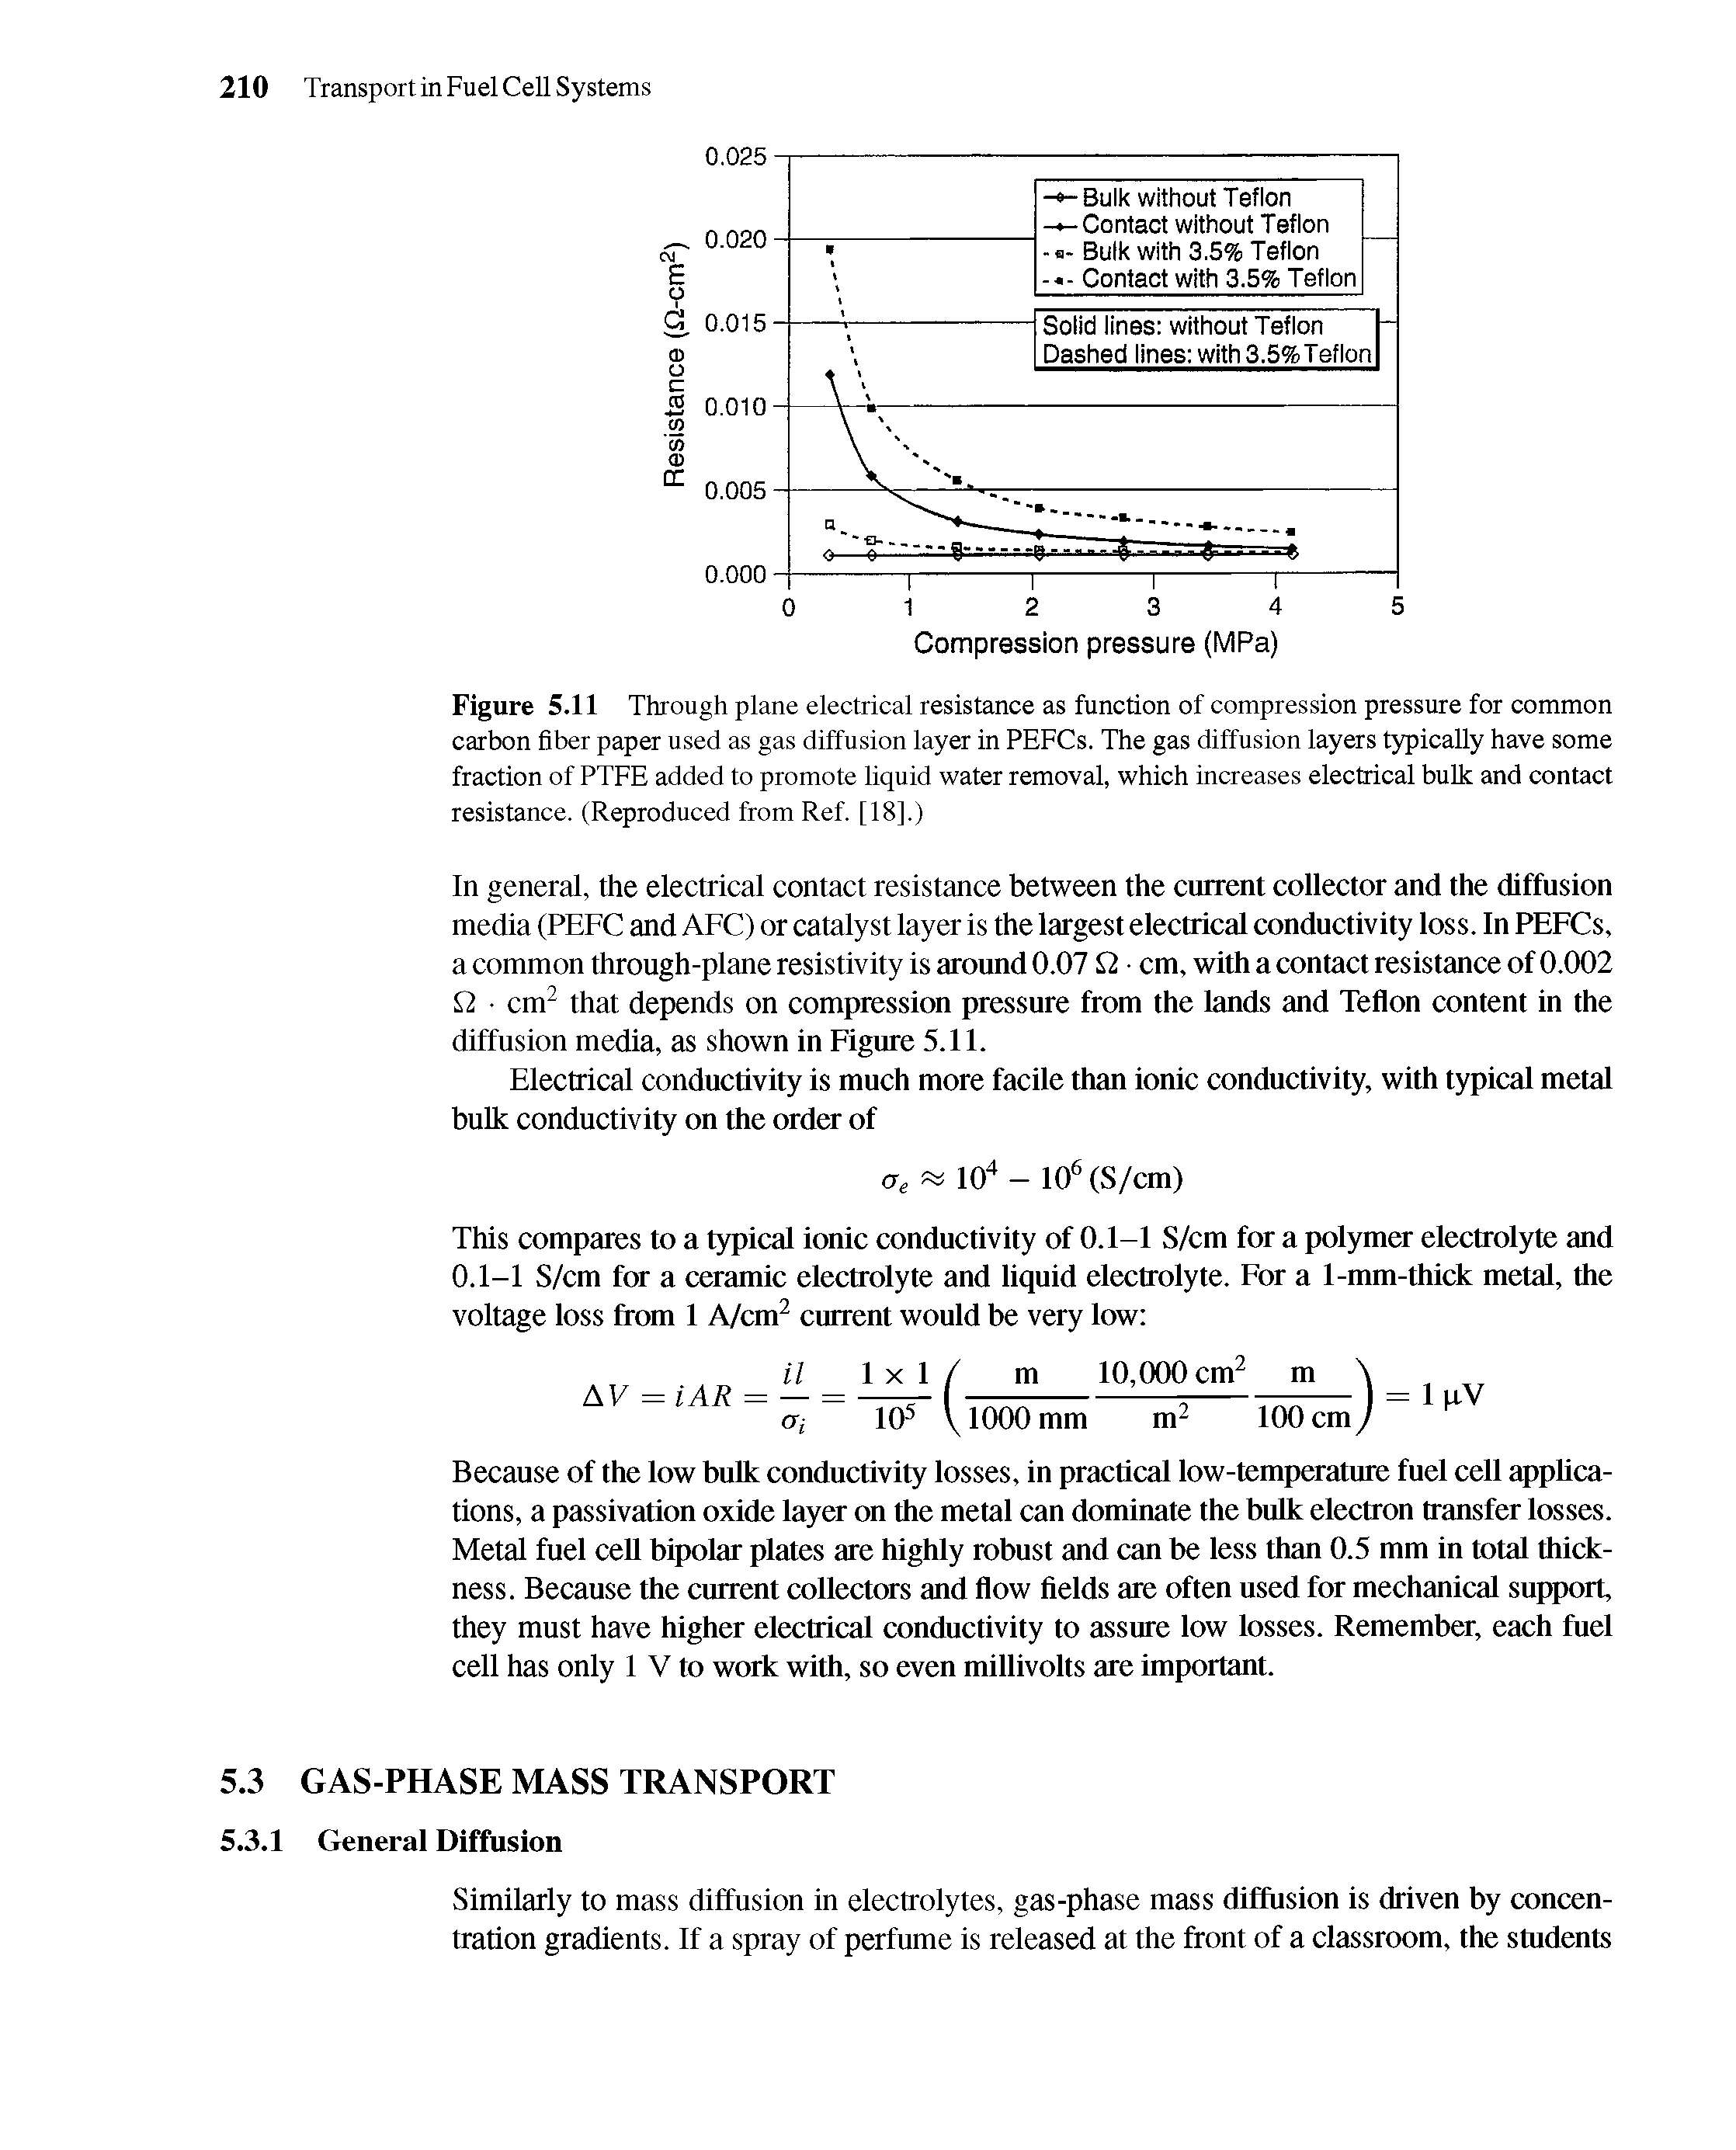 Figure 5.11 Through plane electrical resistance as function of compression pressure for common carbon fiber paper used as gas diffusion layer in PEFCs. The gas diffusion layers typically have some fraction of PTFE added to promote liquid water removal, which increases electrical bulk and contact resistance. (Reproduced from Ref. [18].)...